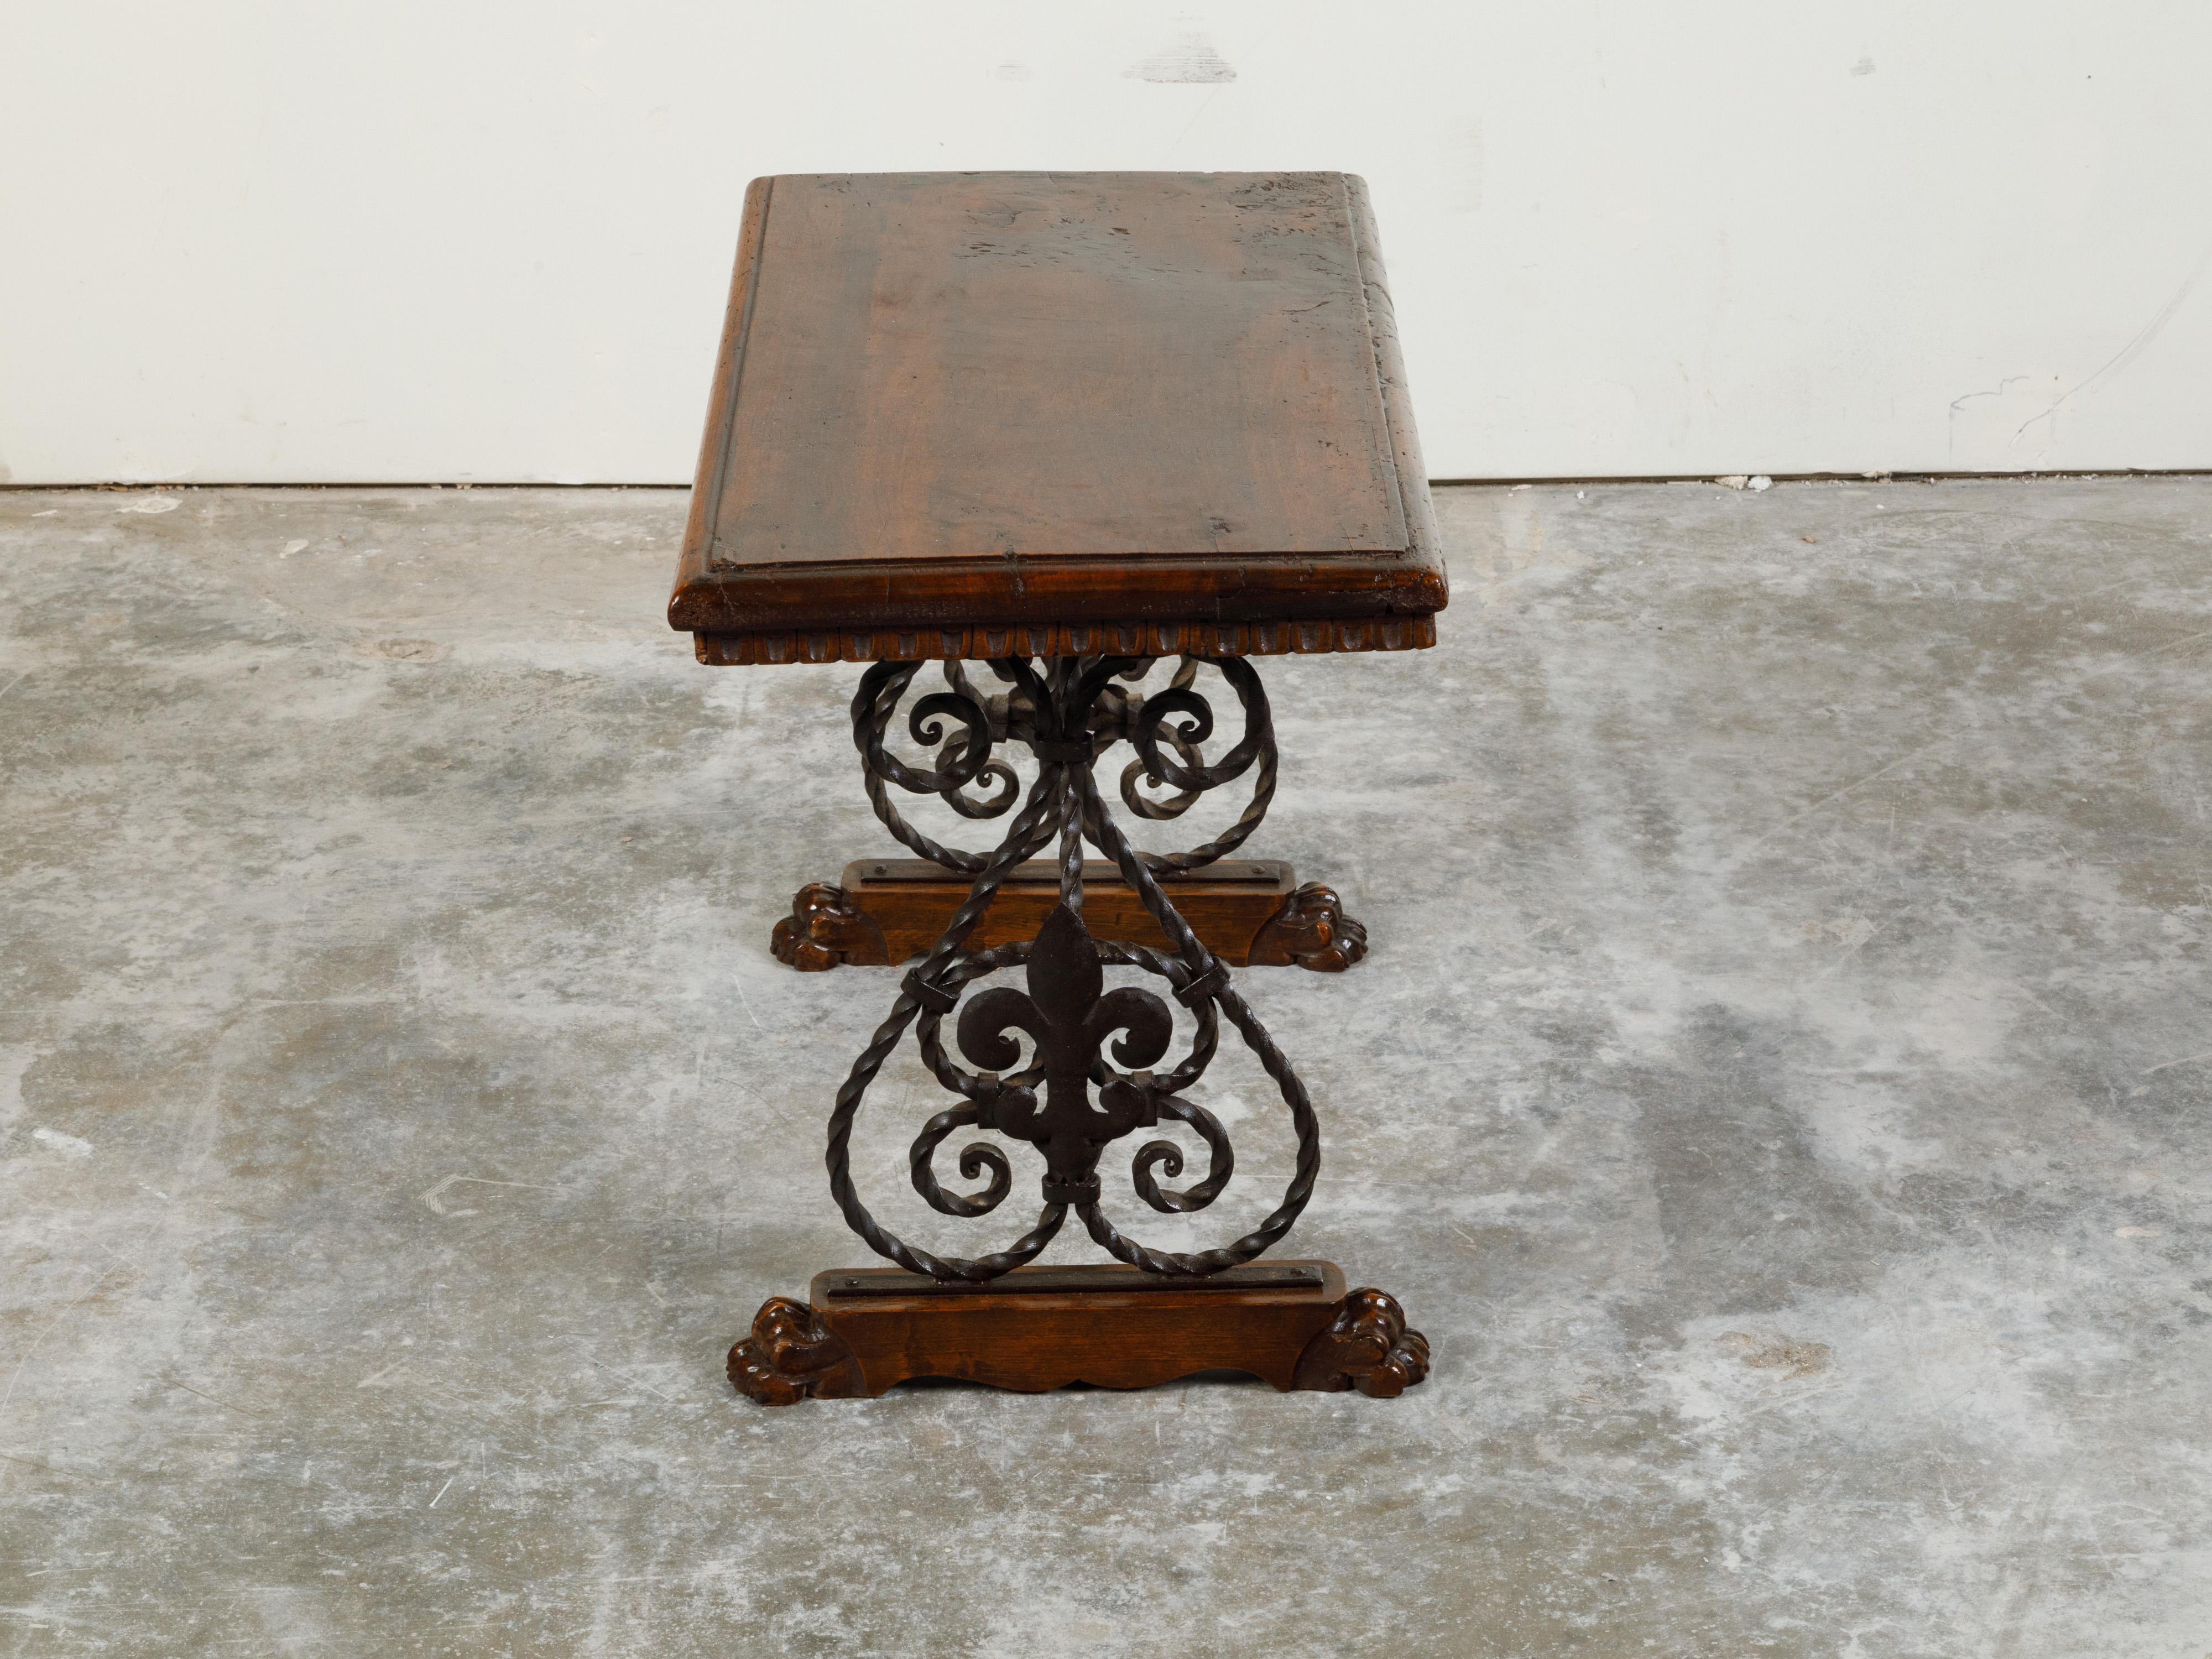 Italian 1900s Walnut Top Console Table with Iron Base and Fleur de Lys Motifs For Sale 3